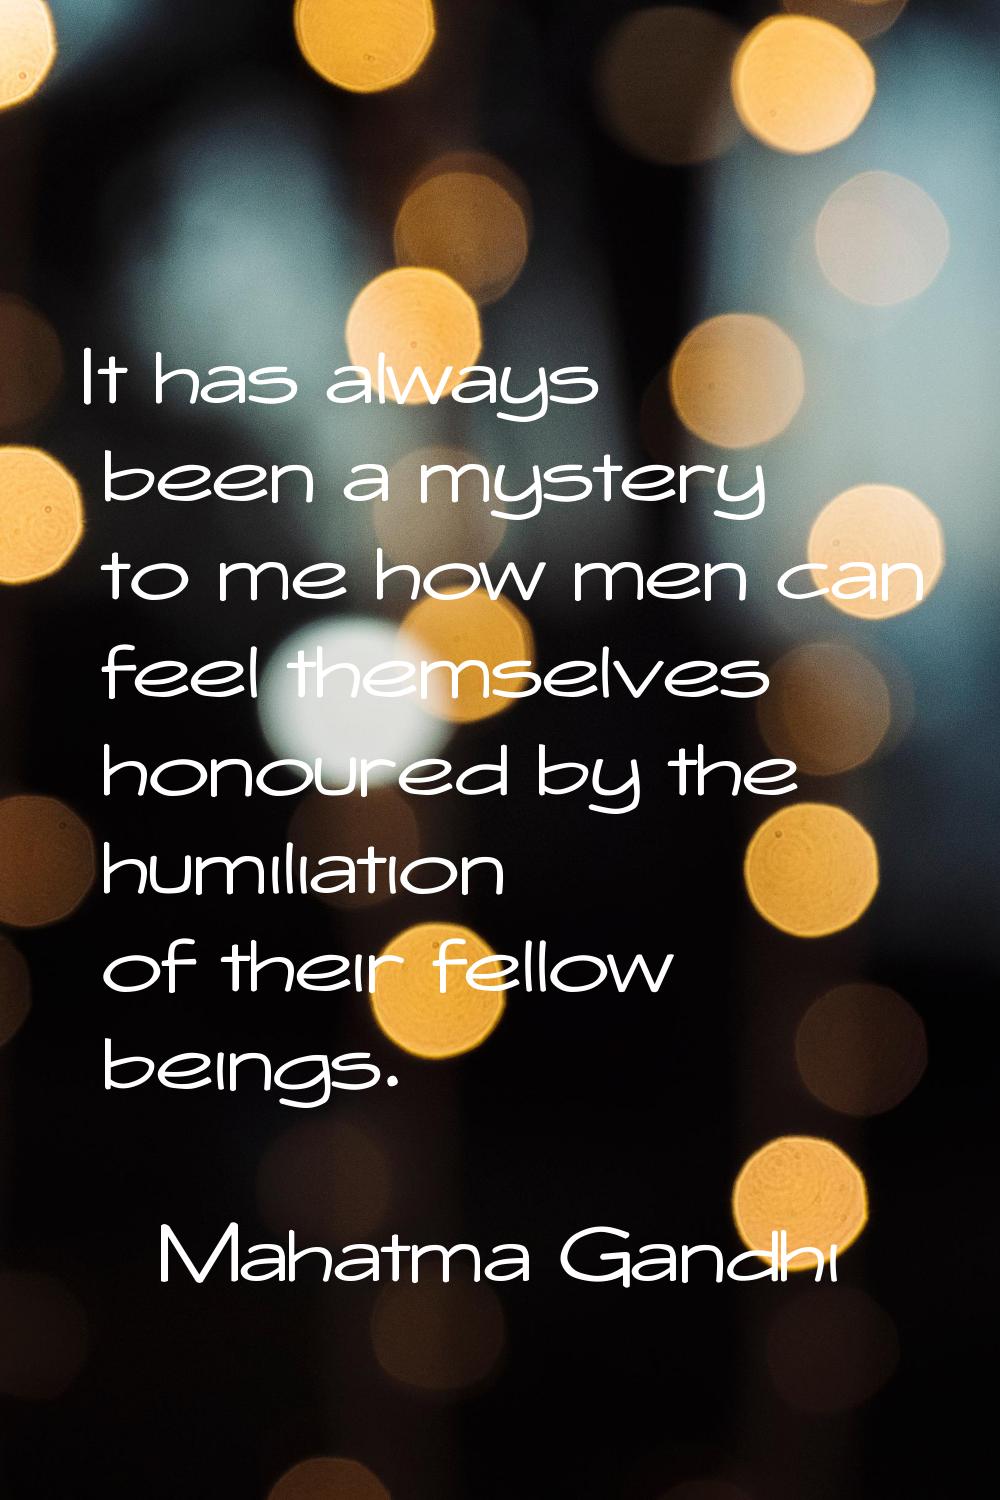 It has always been a mystery to me how men can feel themselves honoured by the humiliation of their